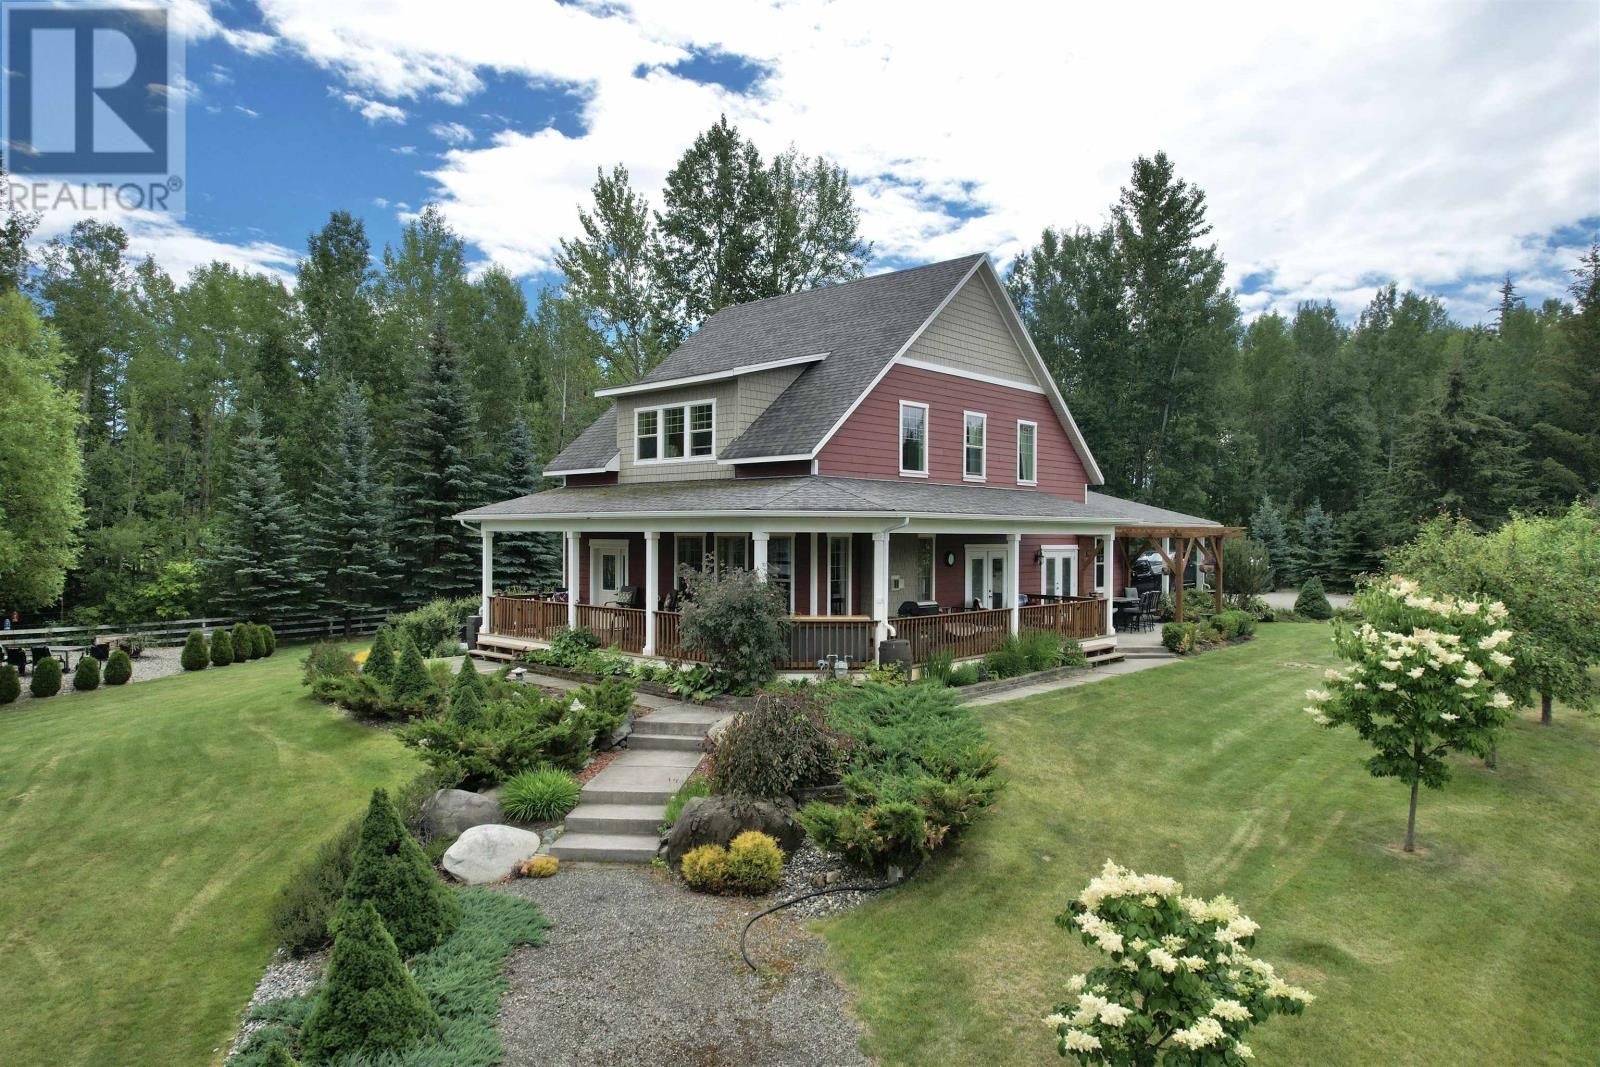 Main Photo: 2100 W SALES ROAD in Quesnel: Agriculture for sale : MLS®# C8048070